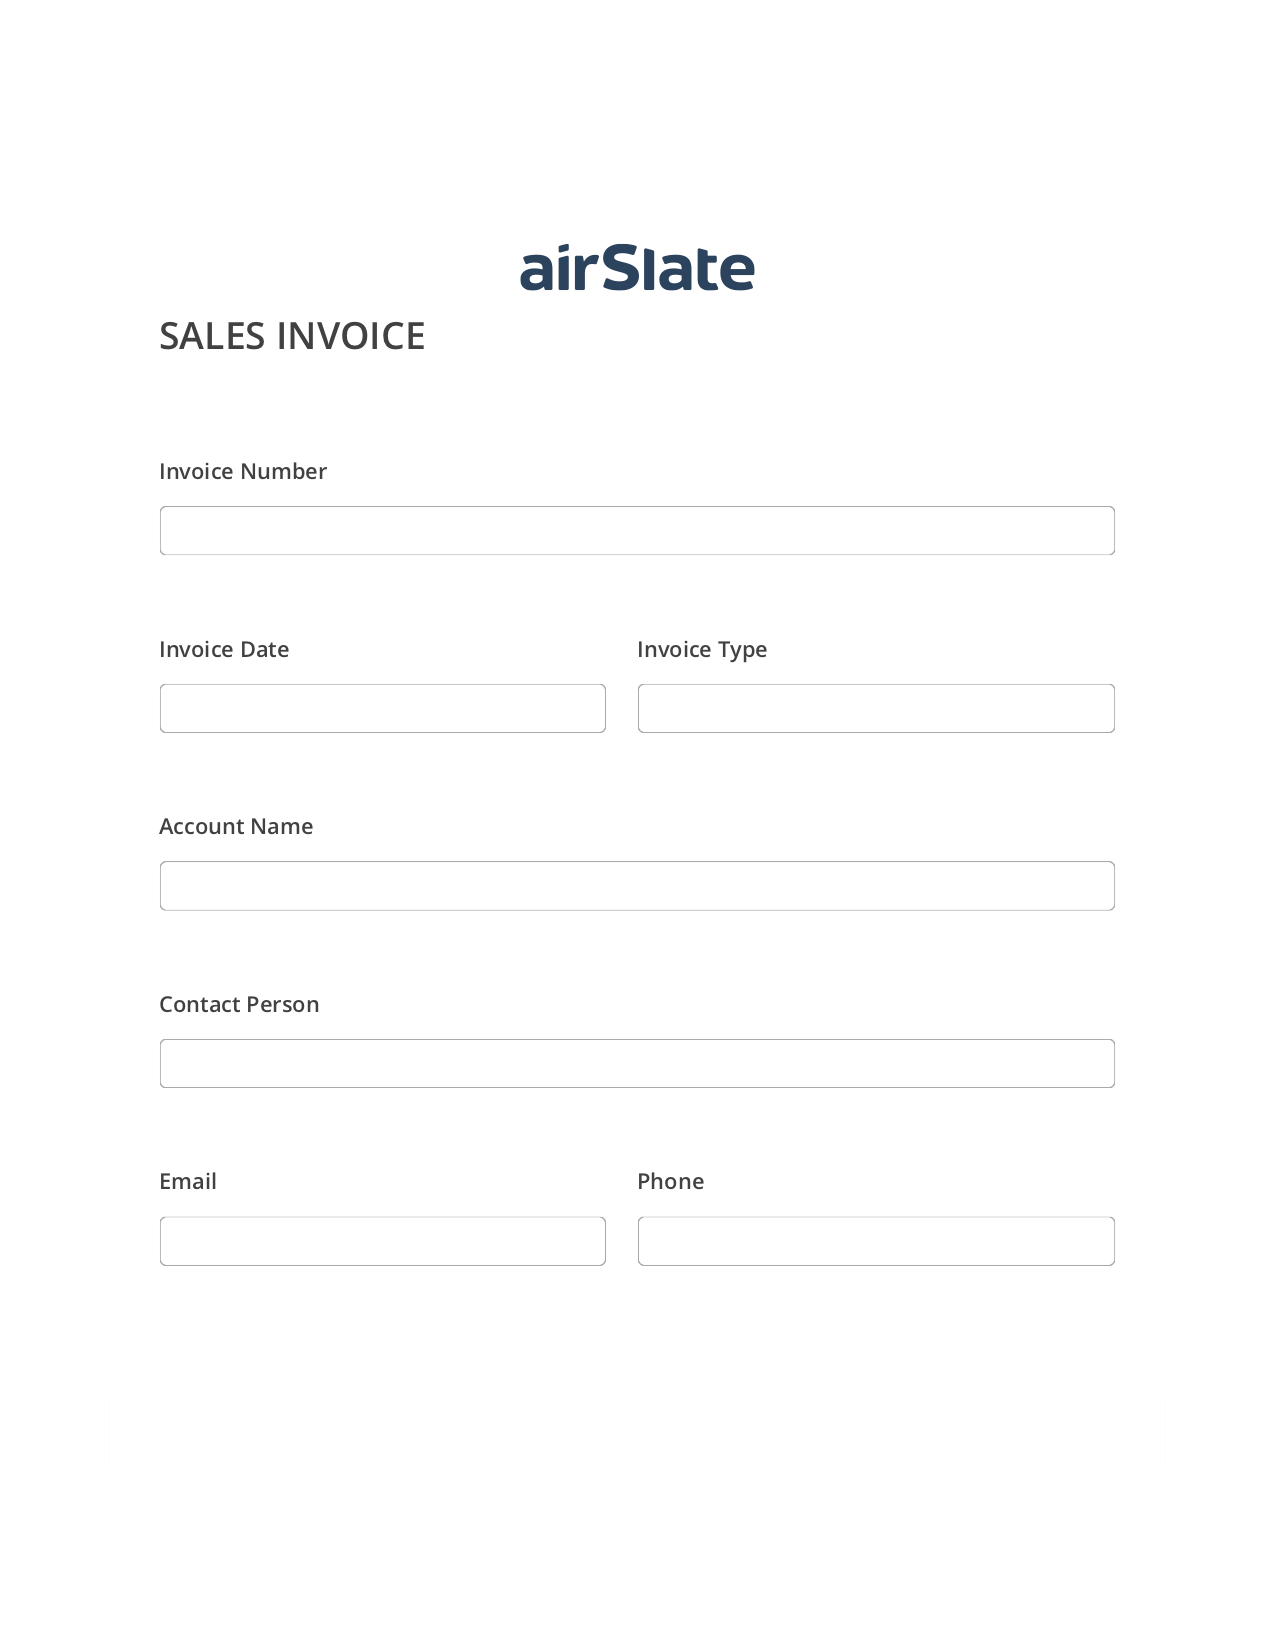 Sales Invoice Flow Pre-fill Slate from MS Dynamics 365 Records